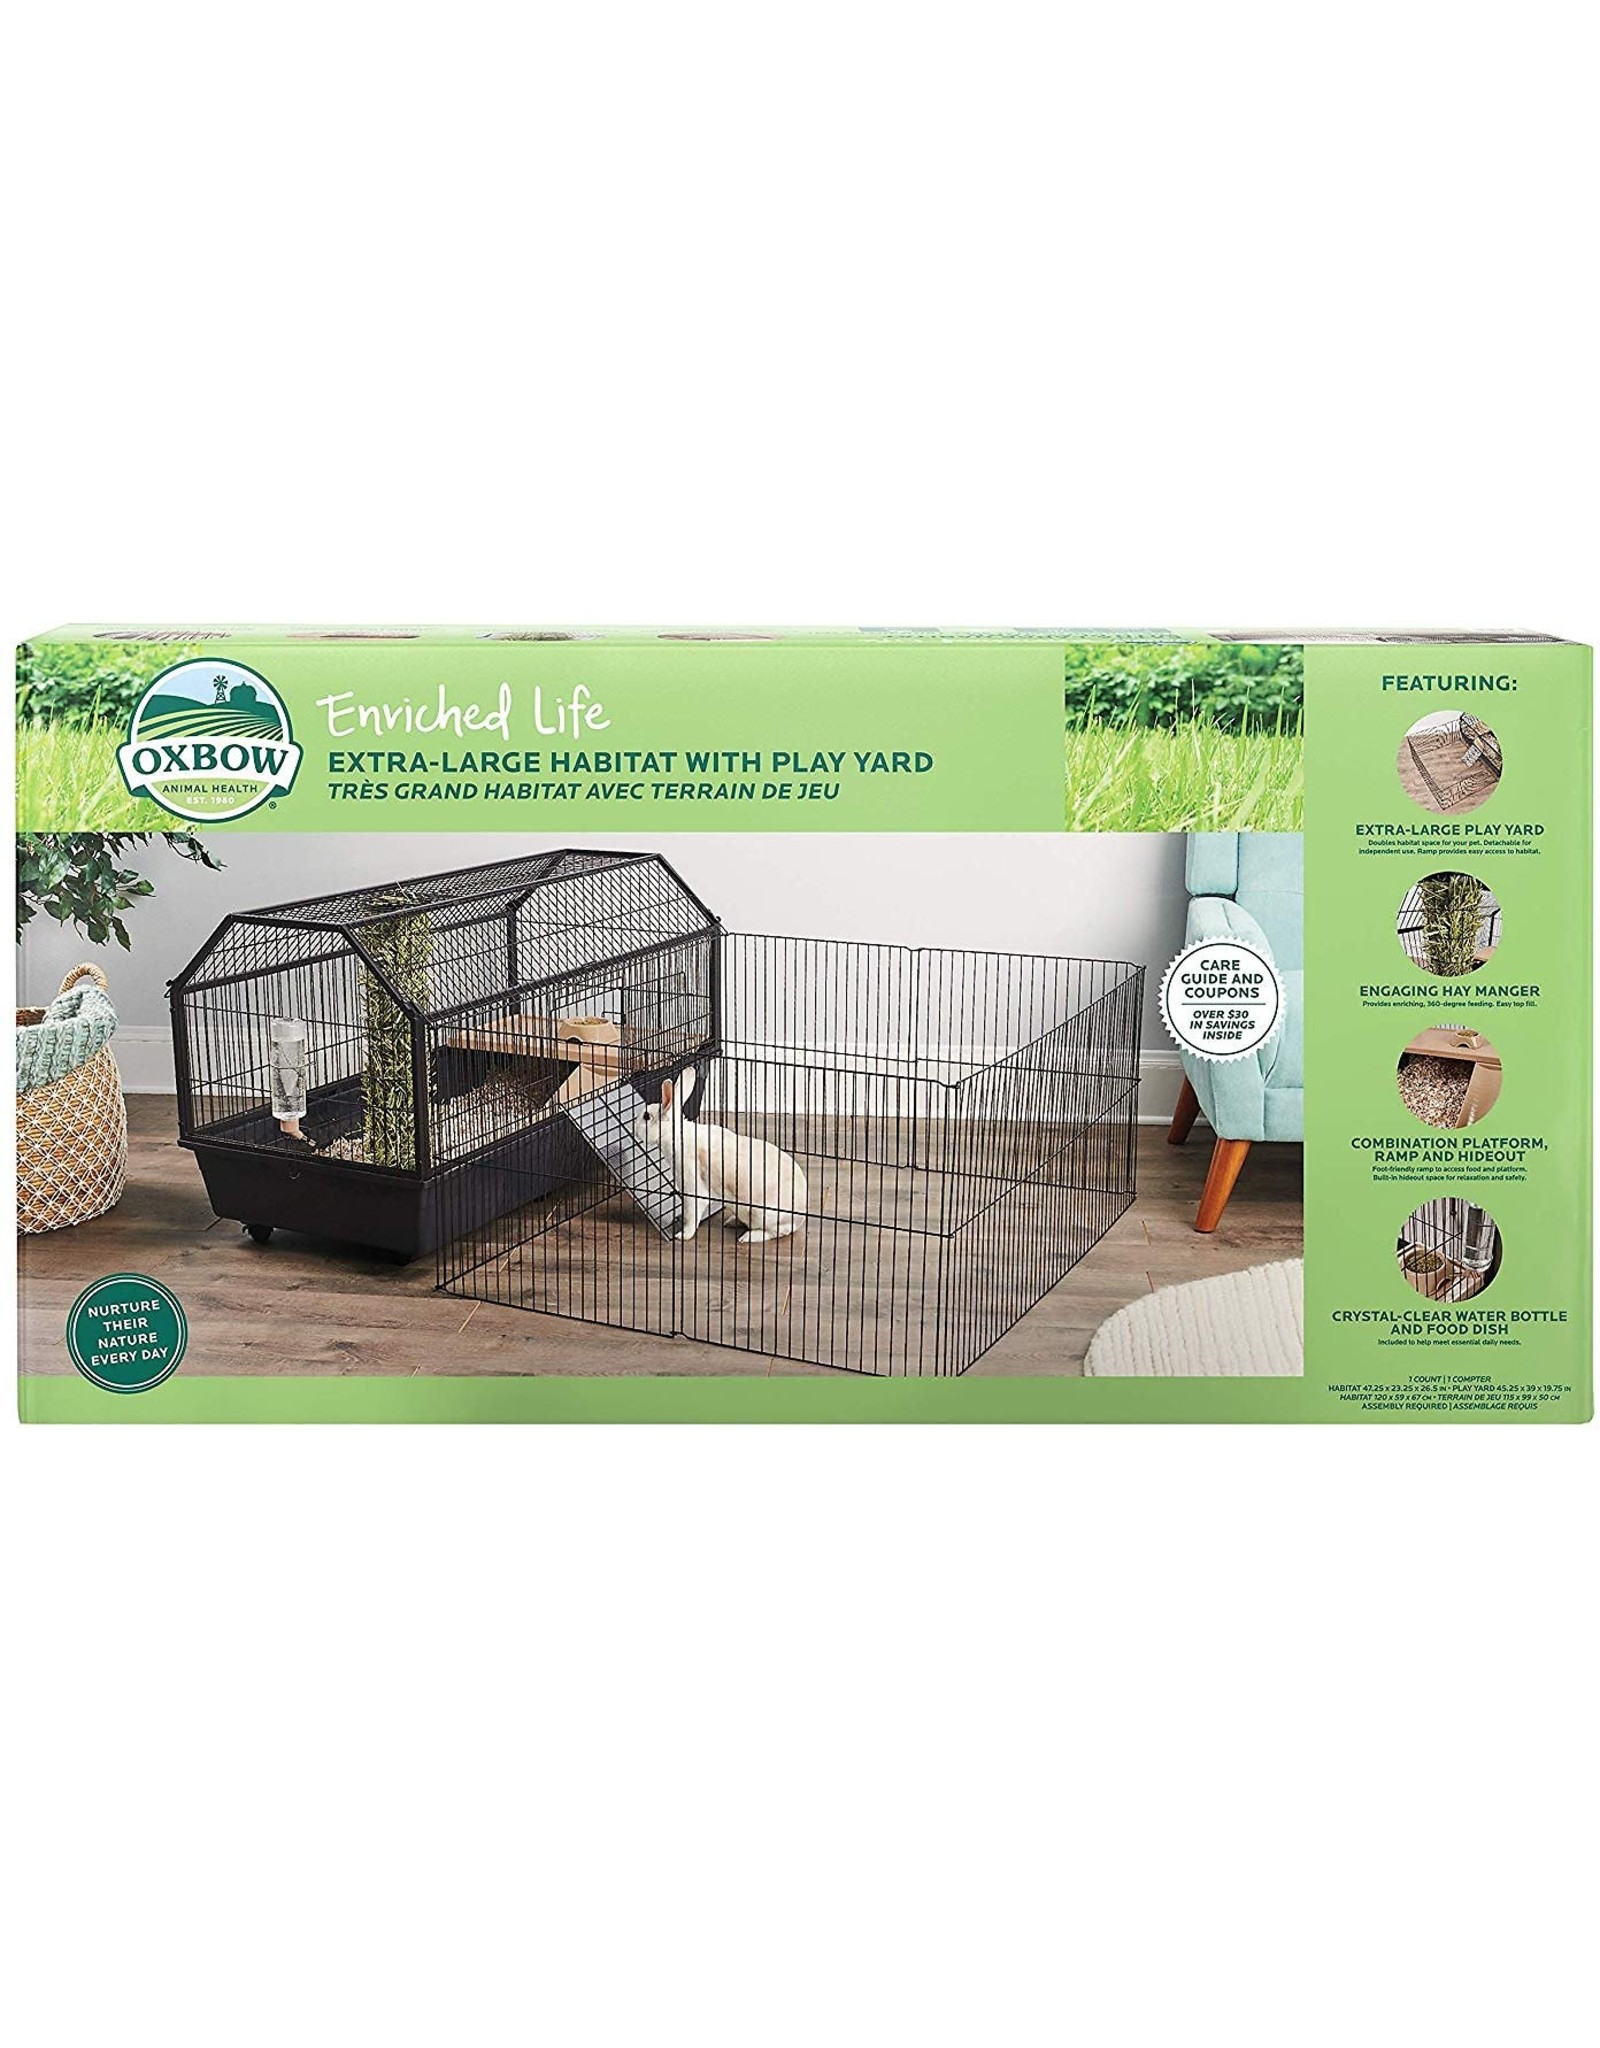 Oxbow Animal Health OXBOW ENRICHED LIFE EXTRA LARGE HABITAT WITH PLAY YARD